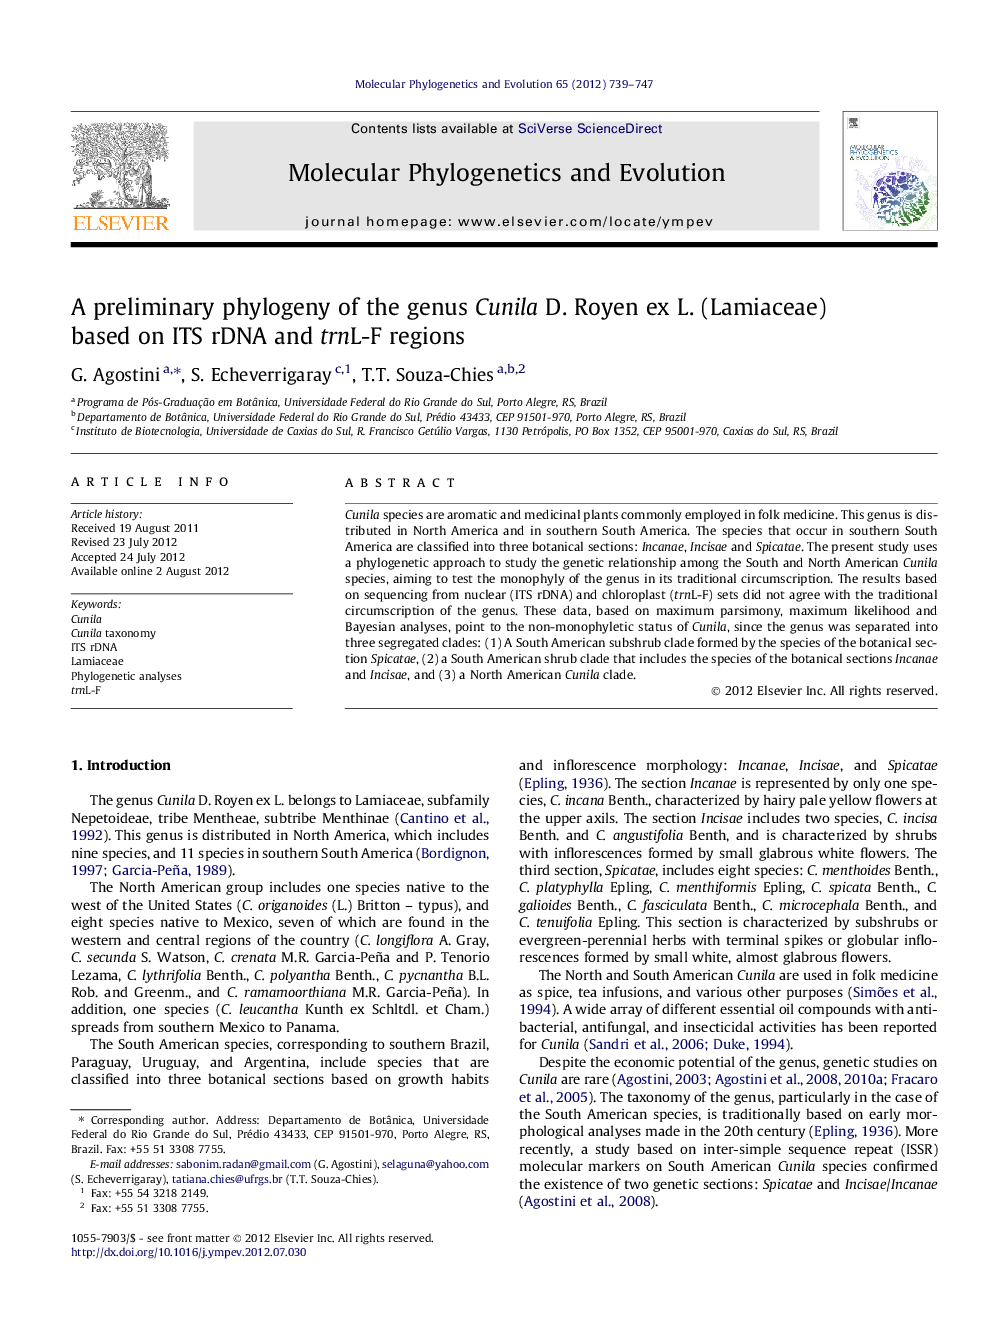 A preliminary phylogeny of the genus Cunila D. Royen ex L. (Lamiaceae) based on ITS rDNA and trnL-F regions